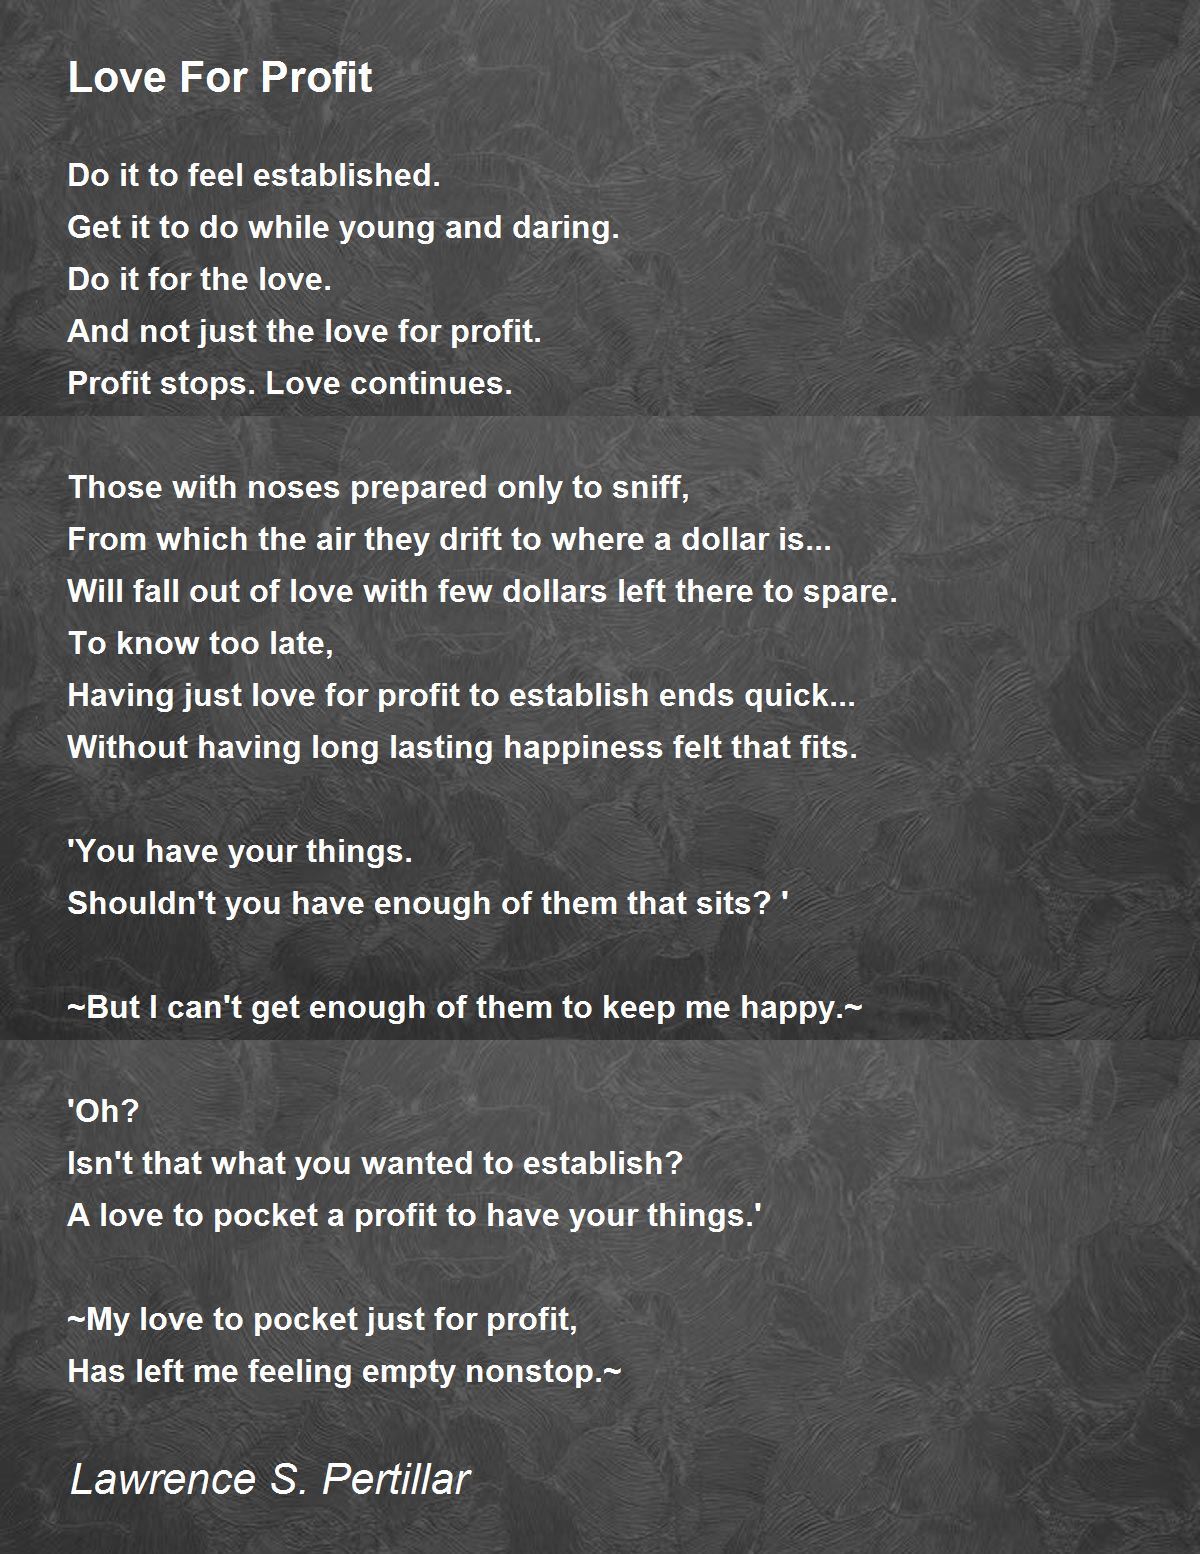 Love For Profit - Love For Profit Poem by Lawrence S. Pertillar